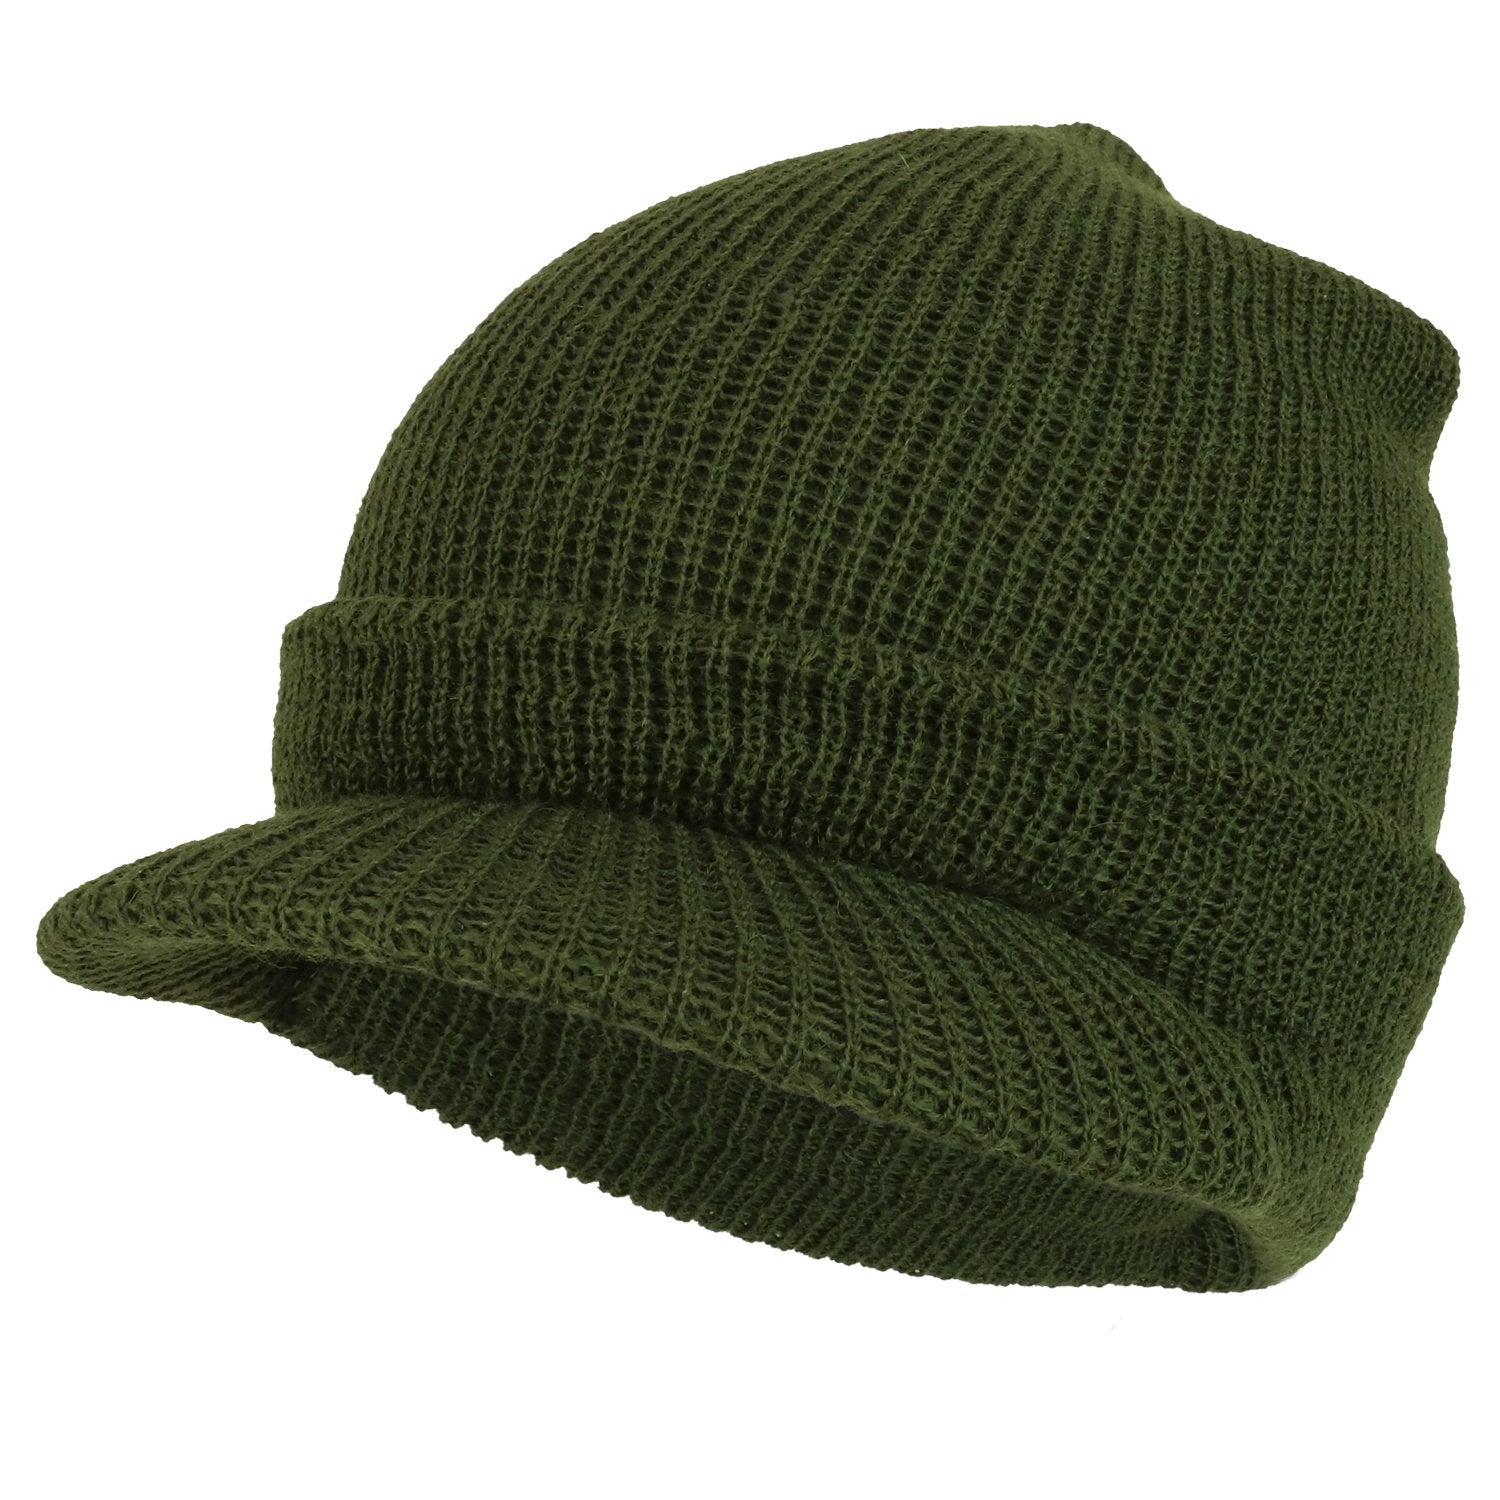 Orientalsk Brug af en computer Historiker Armycrew Made in USA Government Issue Wool Ribbed Visor Beanie Cap - B -  Armycrew.com